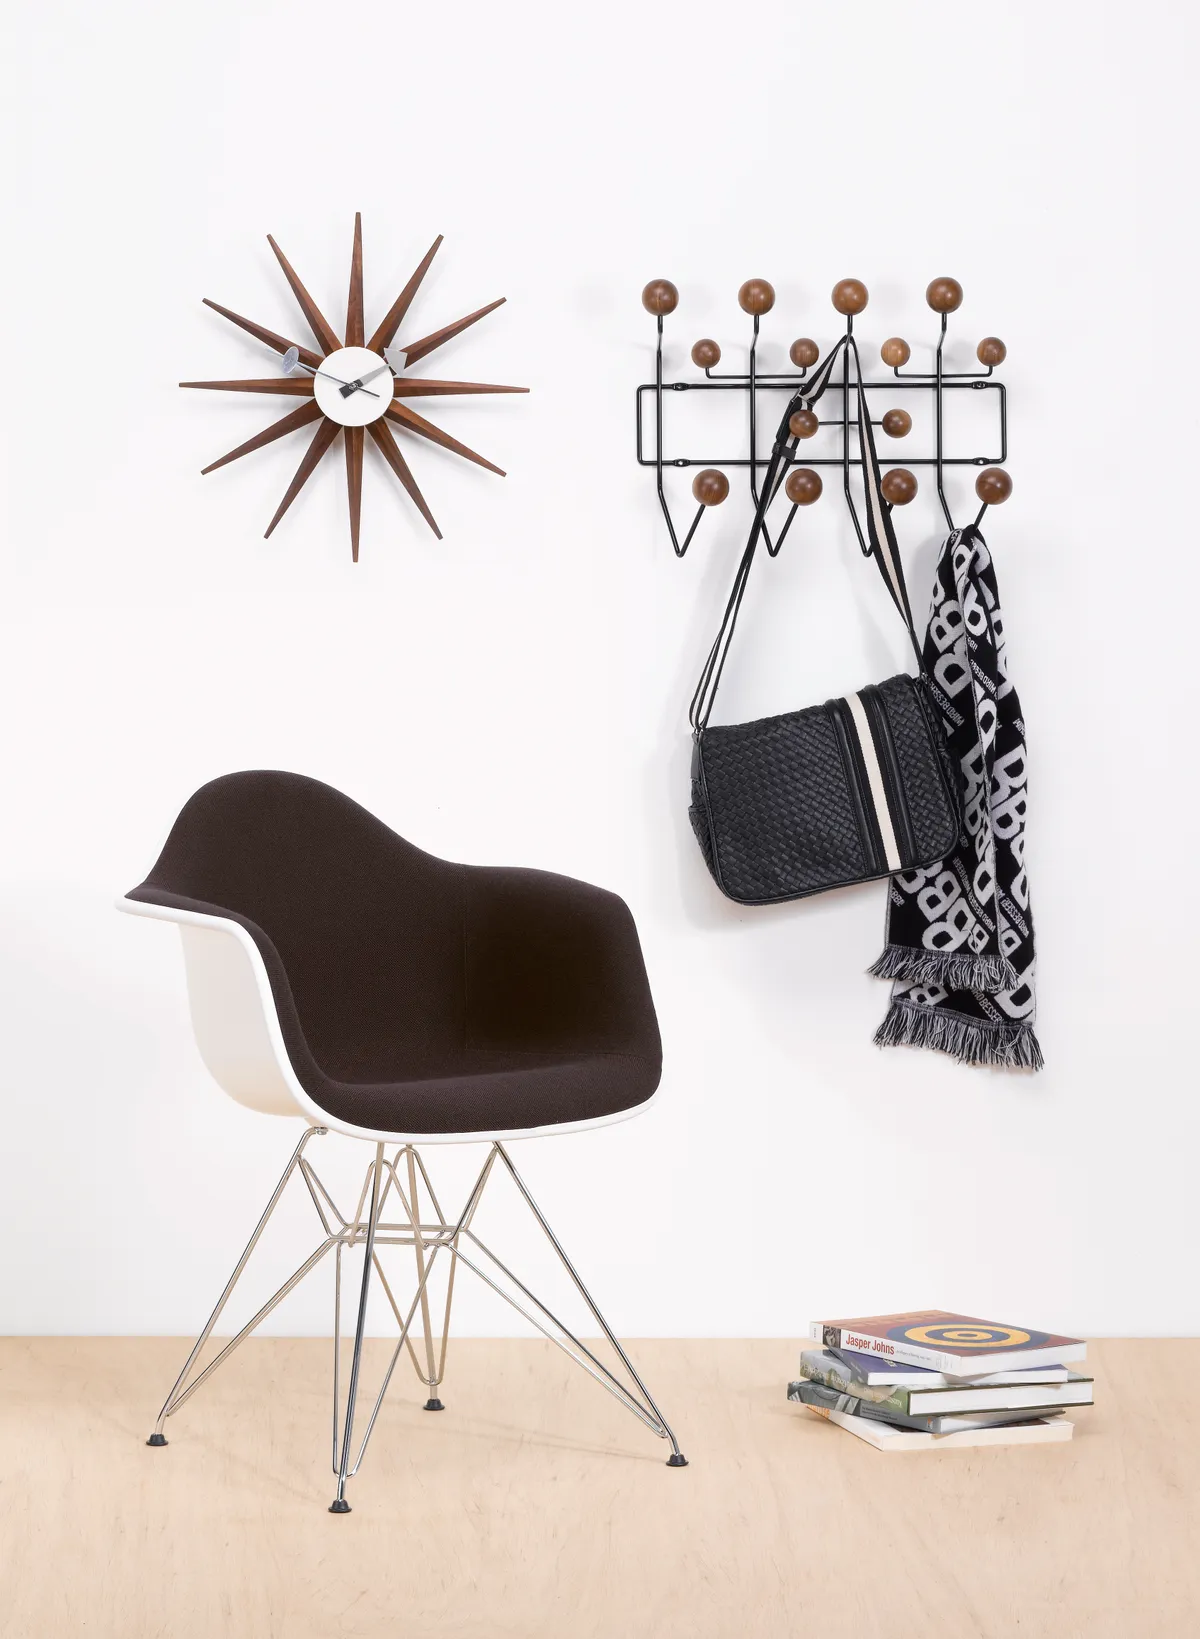 A special edition Eames Hang it All beside an Eames DSW armchair and a mid-century clock